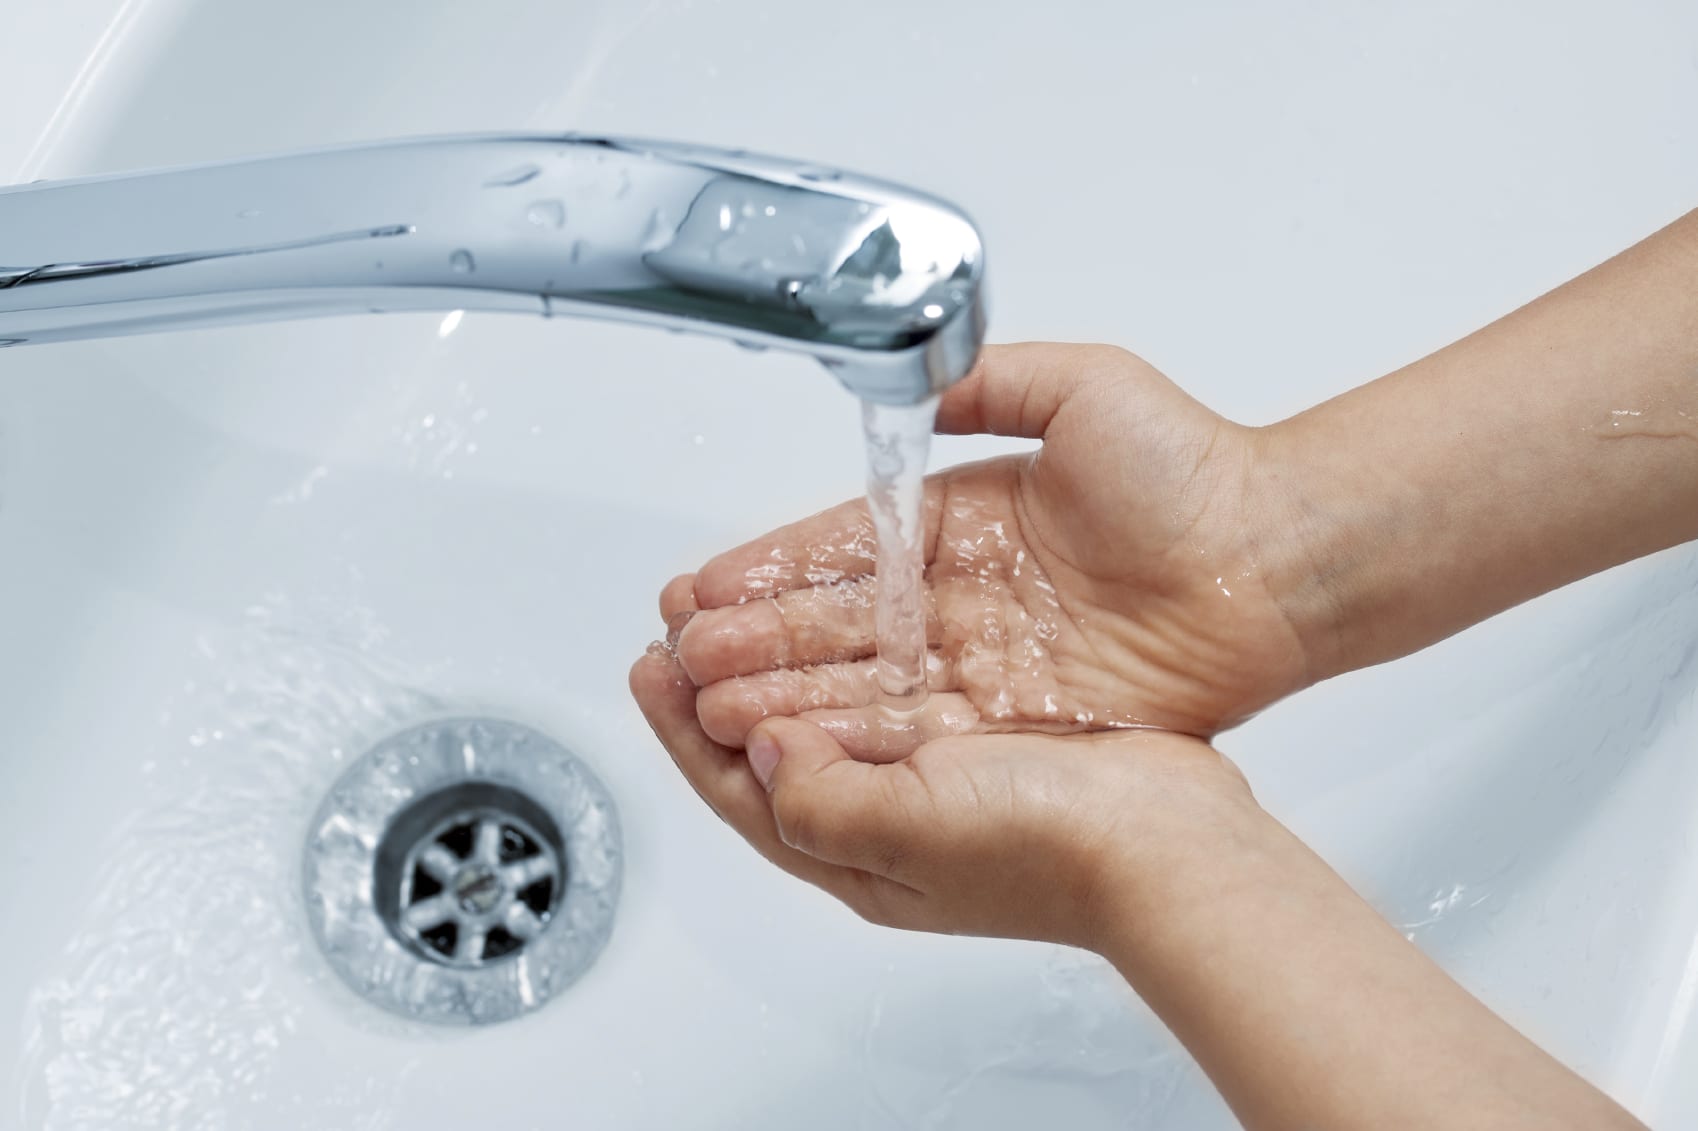 Close-up of hands under running water faucet